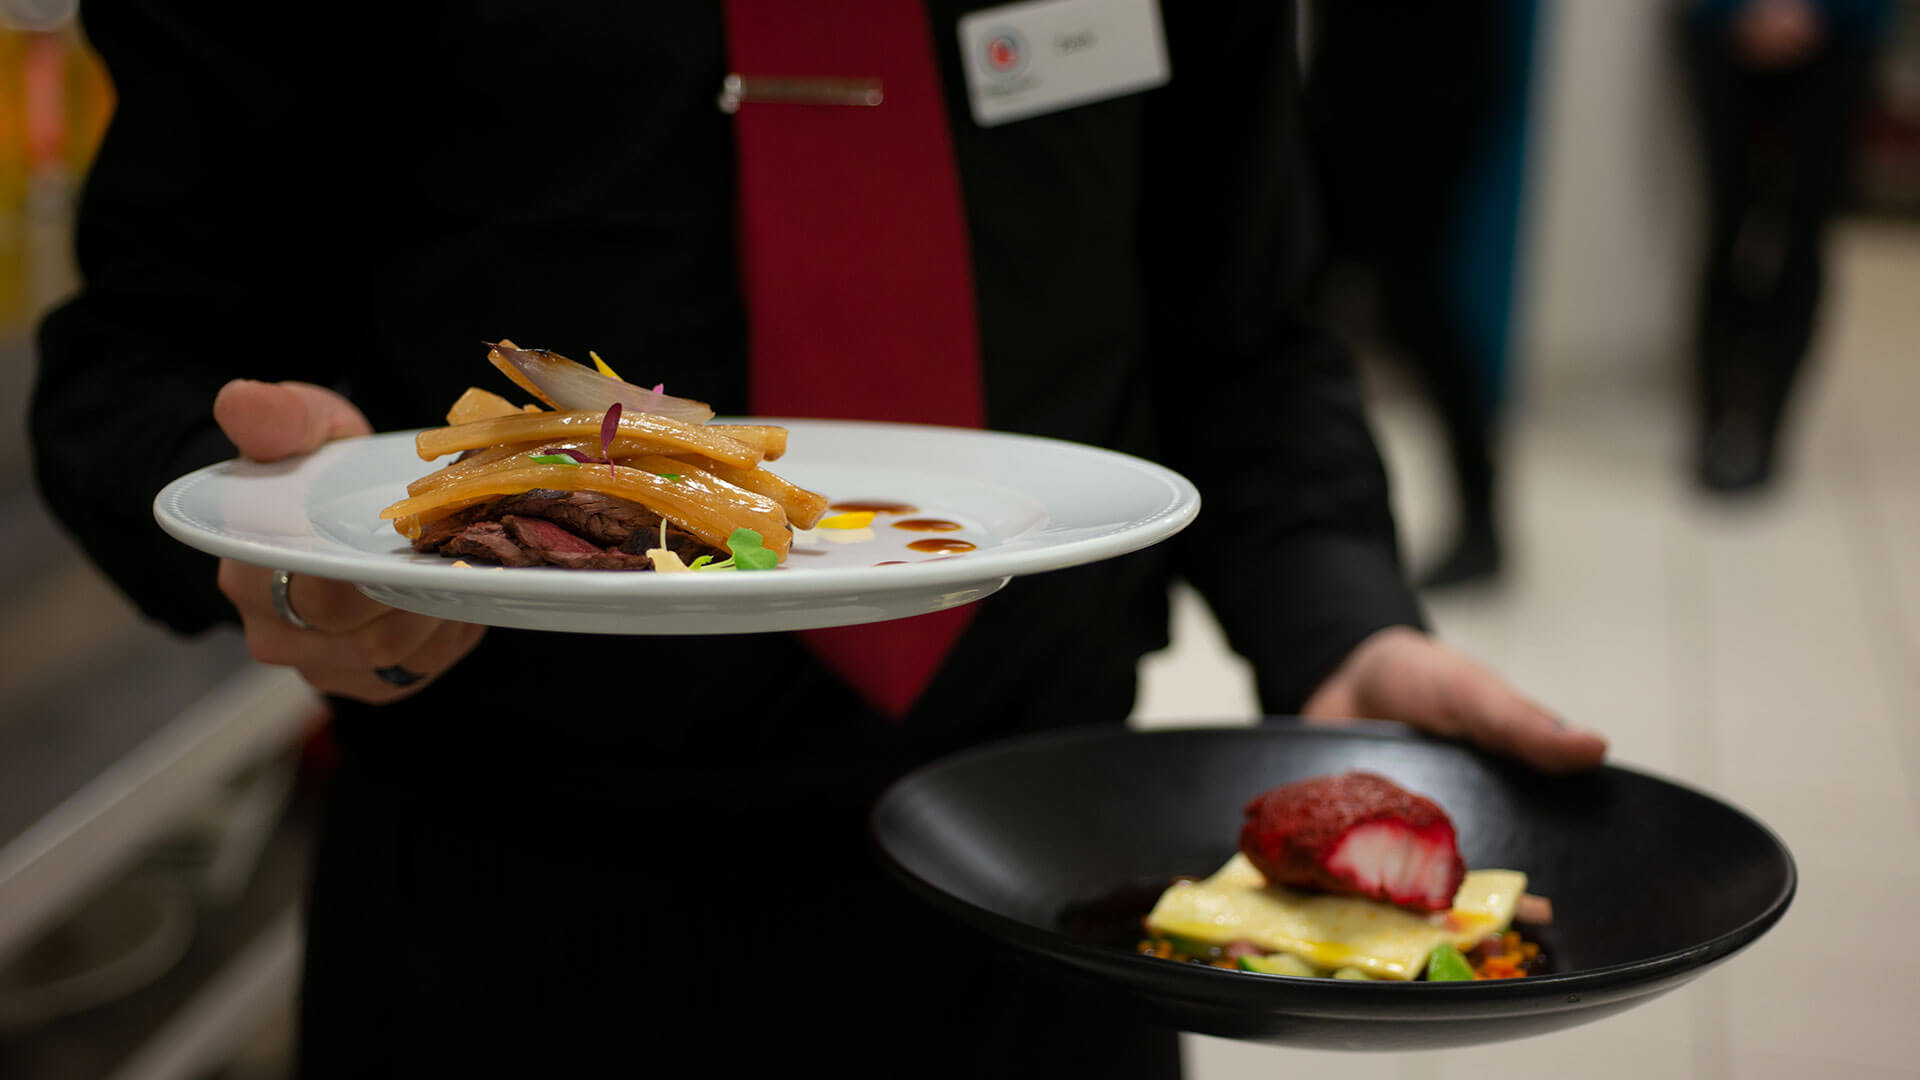 A waiter presenting two sophisticated dishes, showcasing fine dining plating techniques.